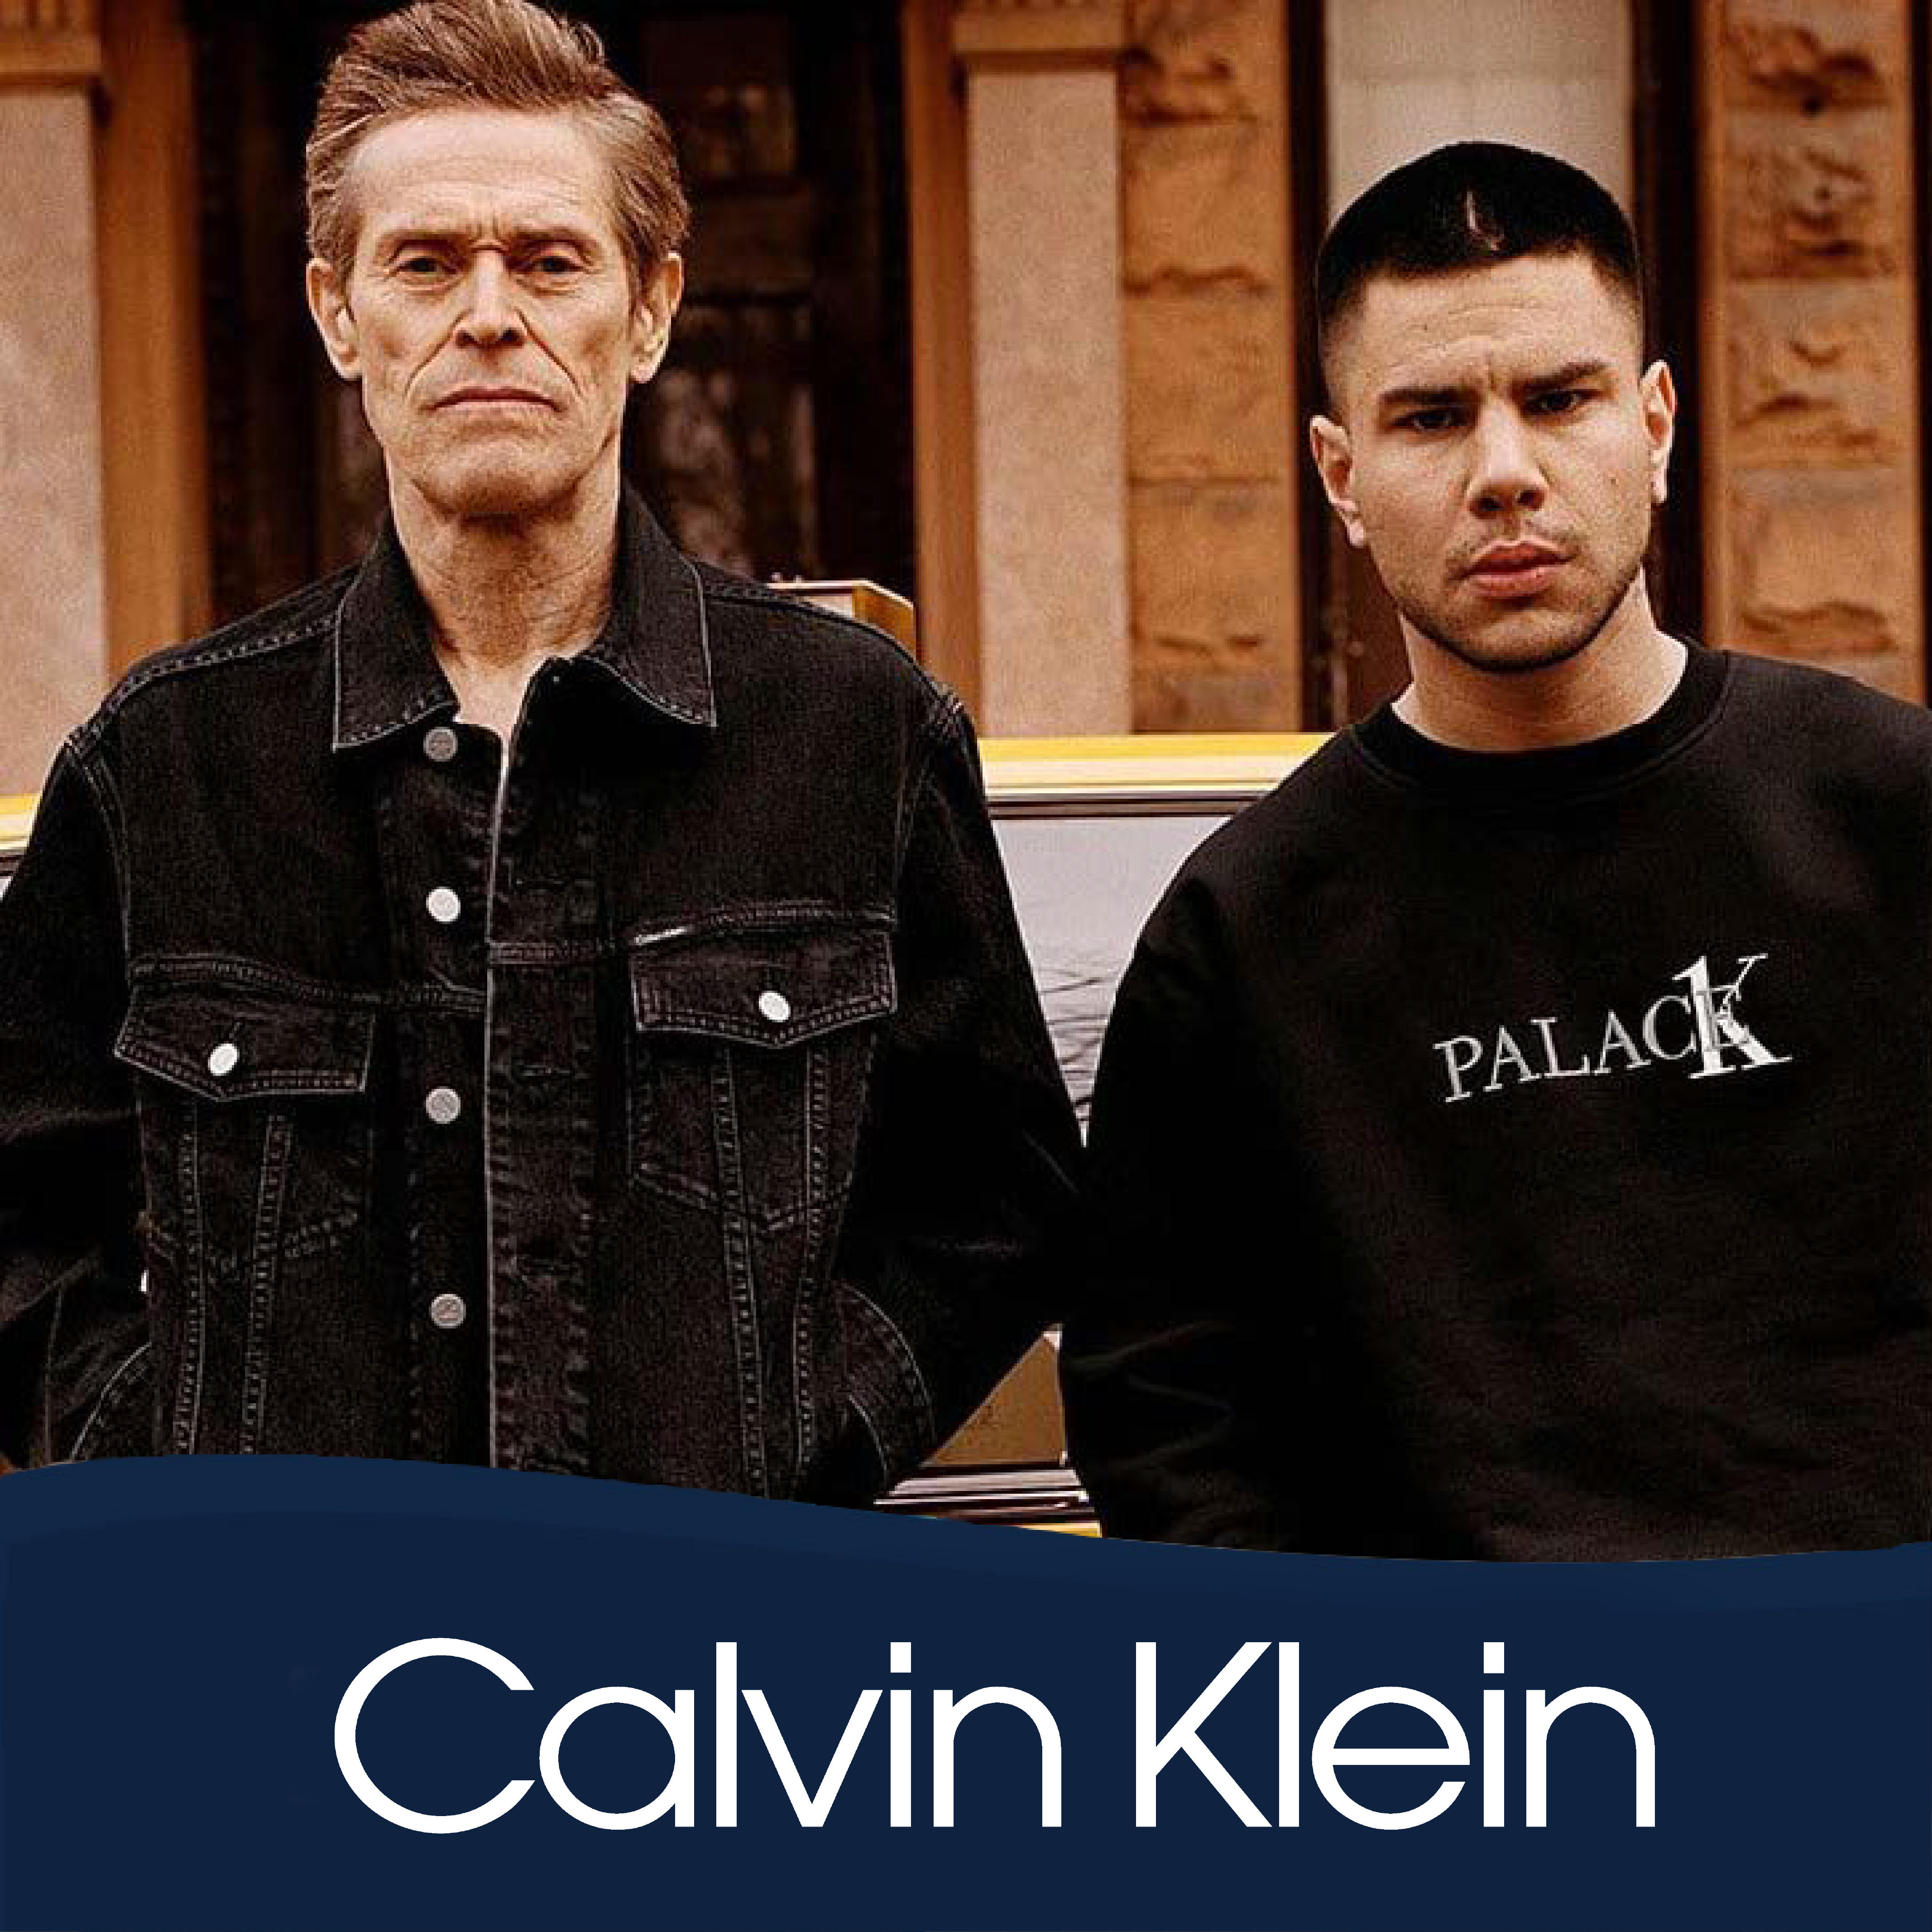 How Campaign Software Helped Calvin Klein's CK1 Palace drive $5.2M EMV